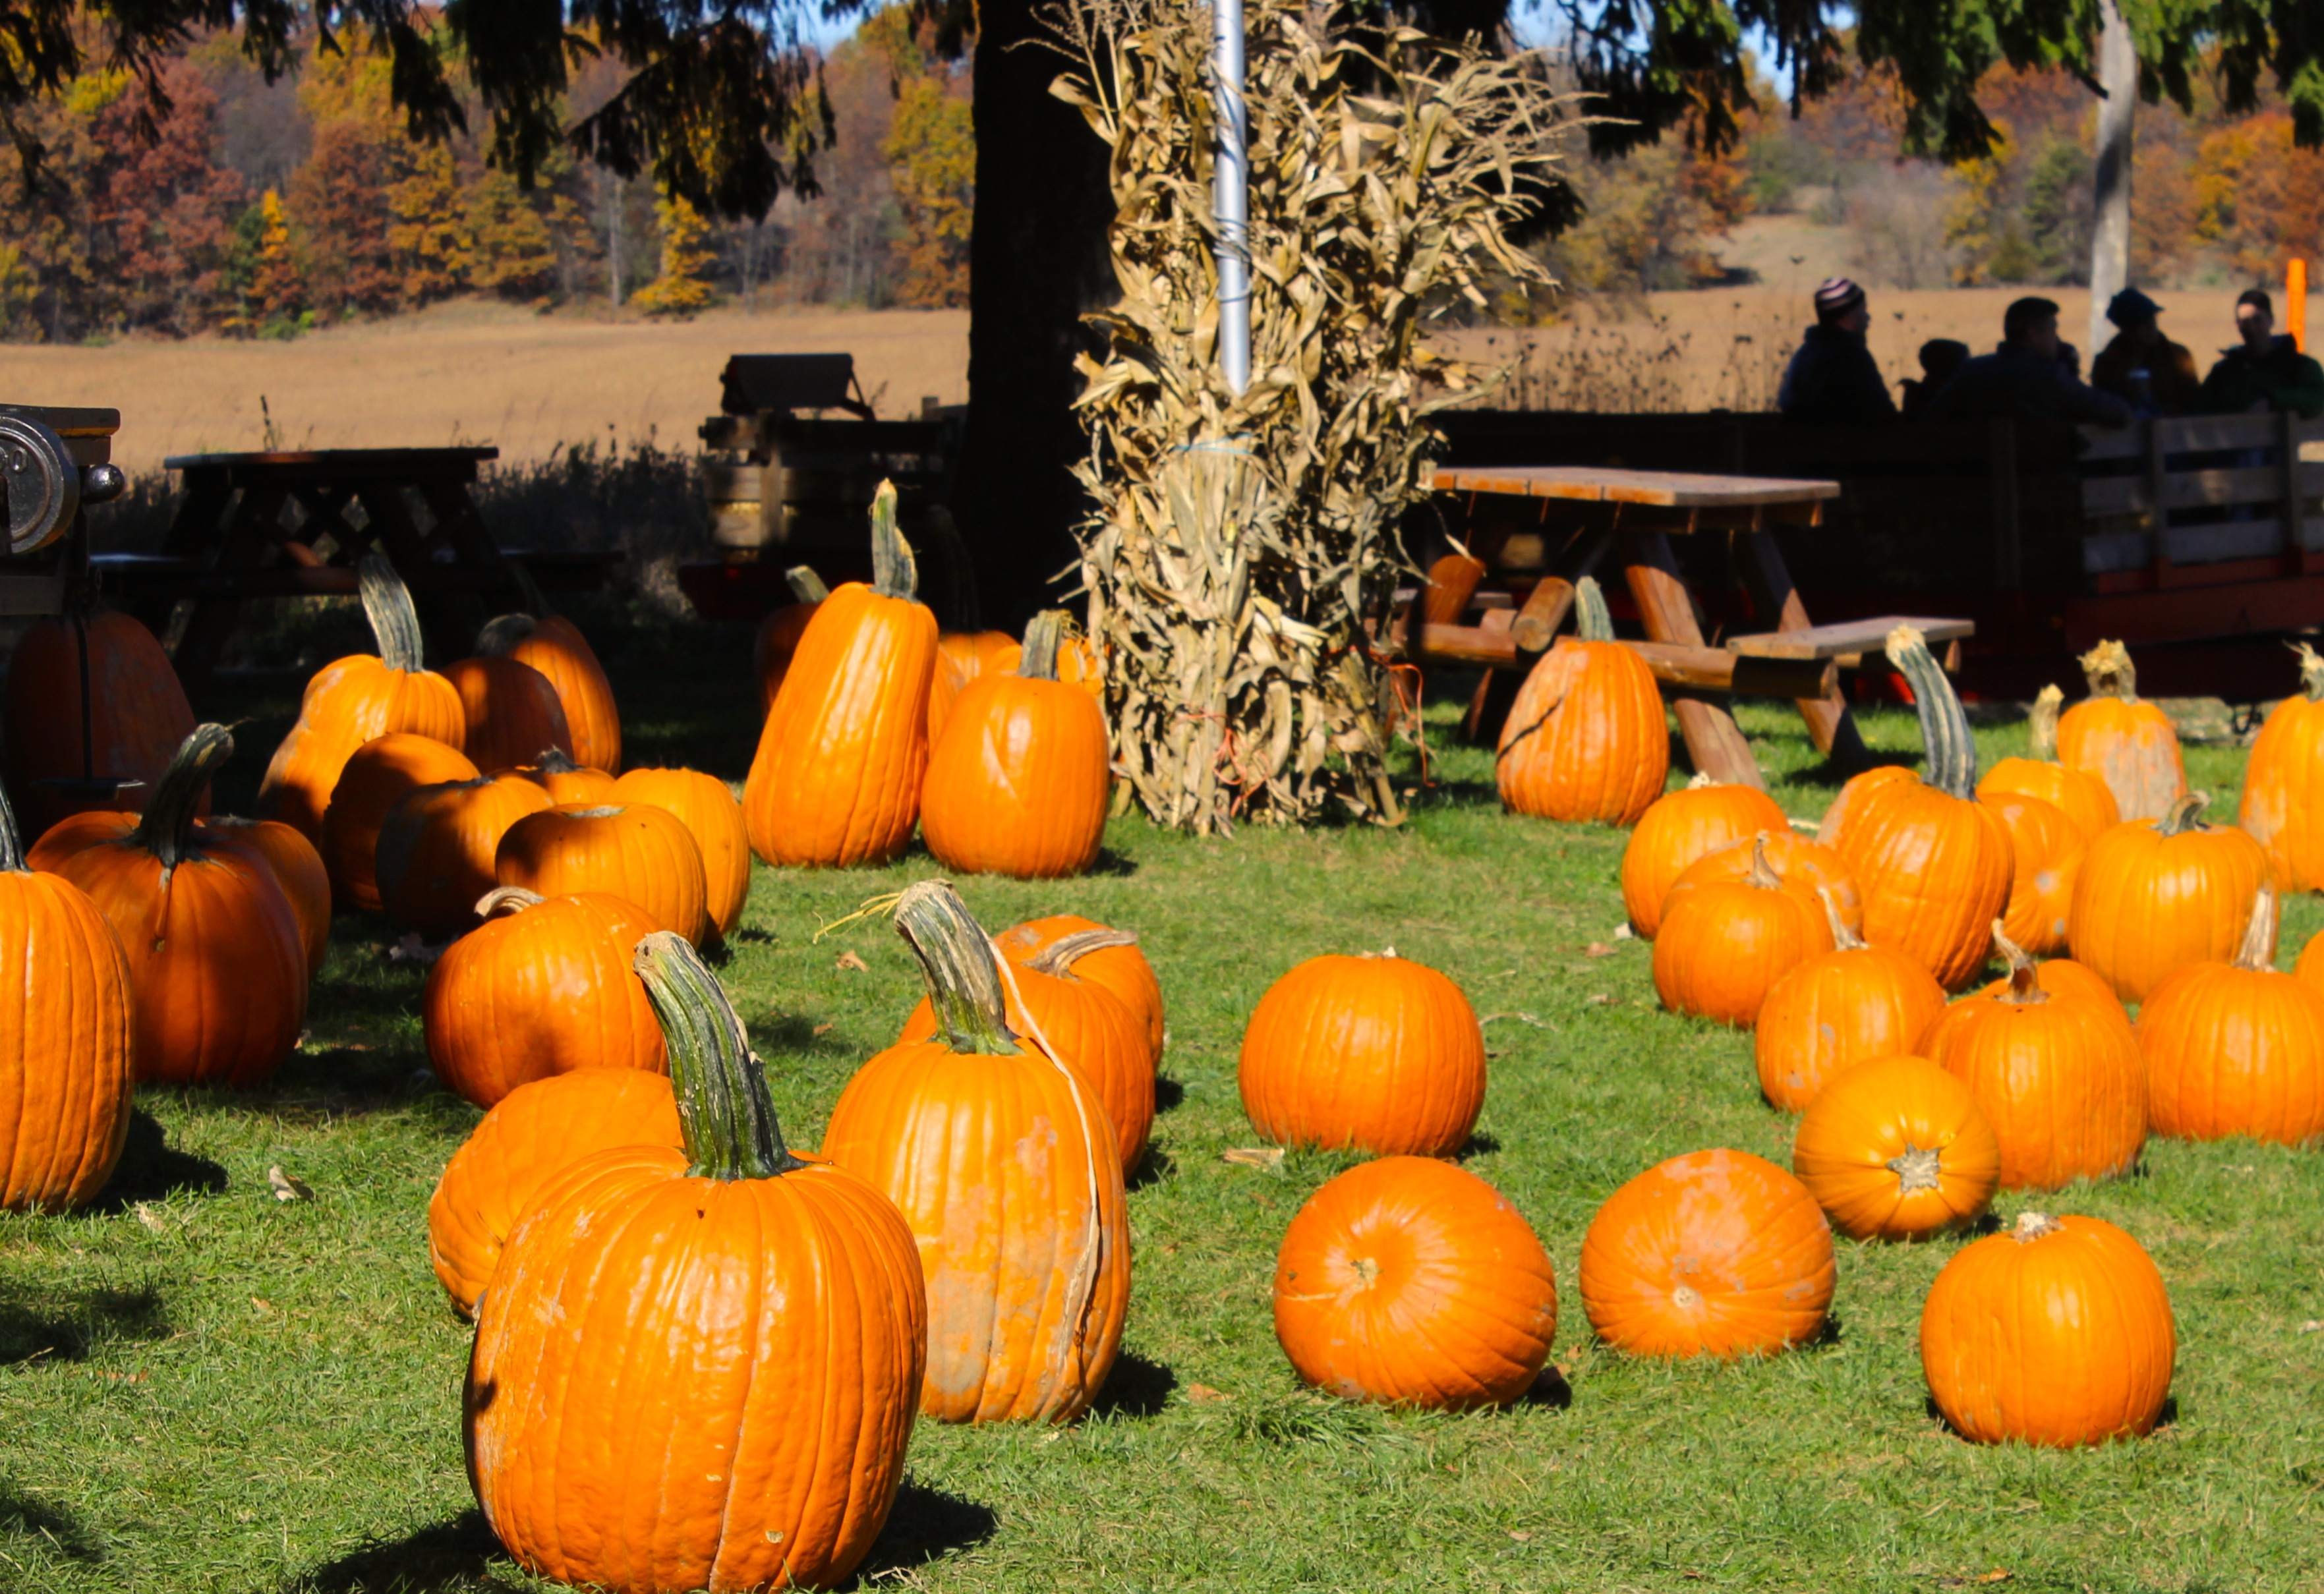 Local Farms Have Still Have Lots of Pumpkins for Sale | The Manchester ...